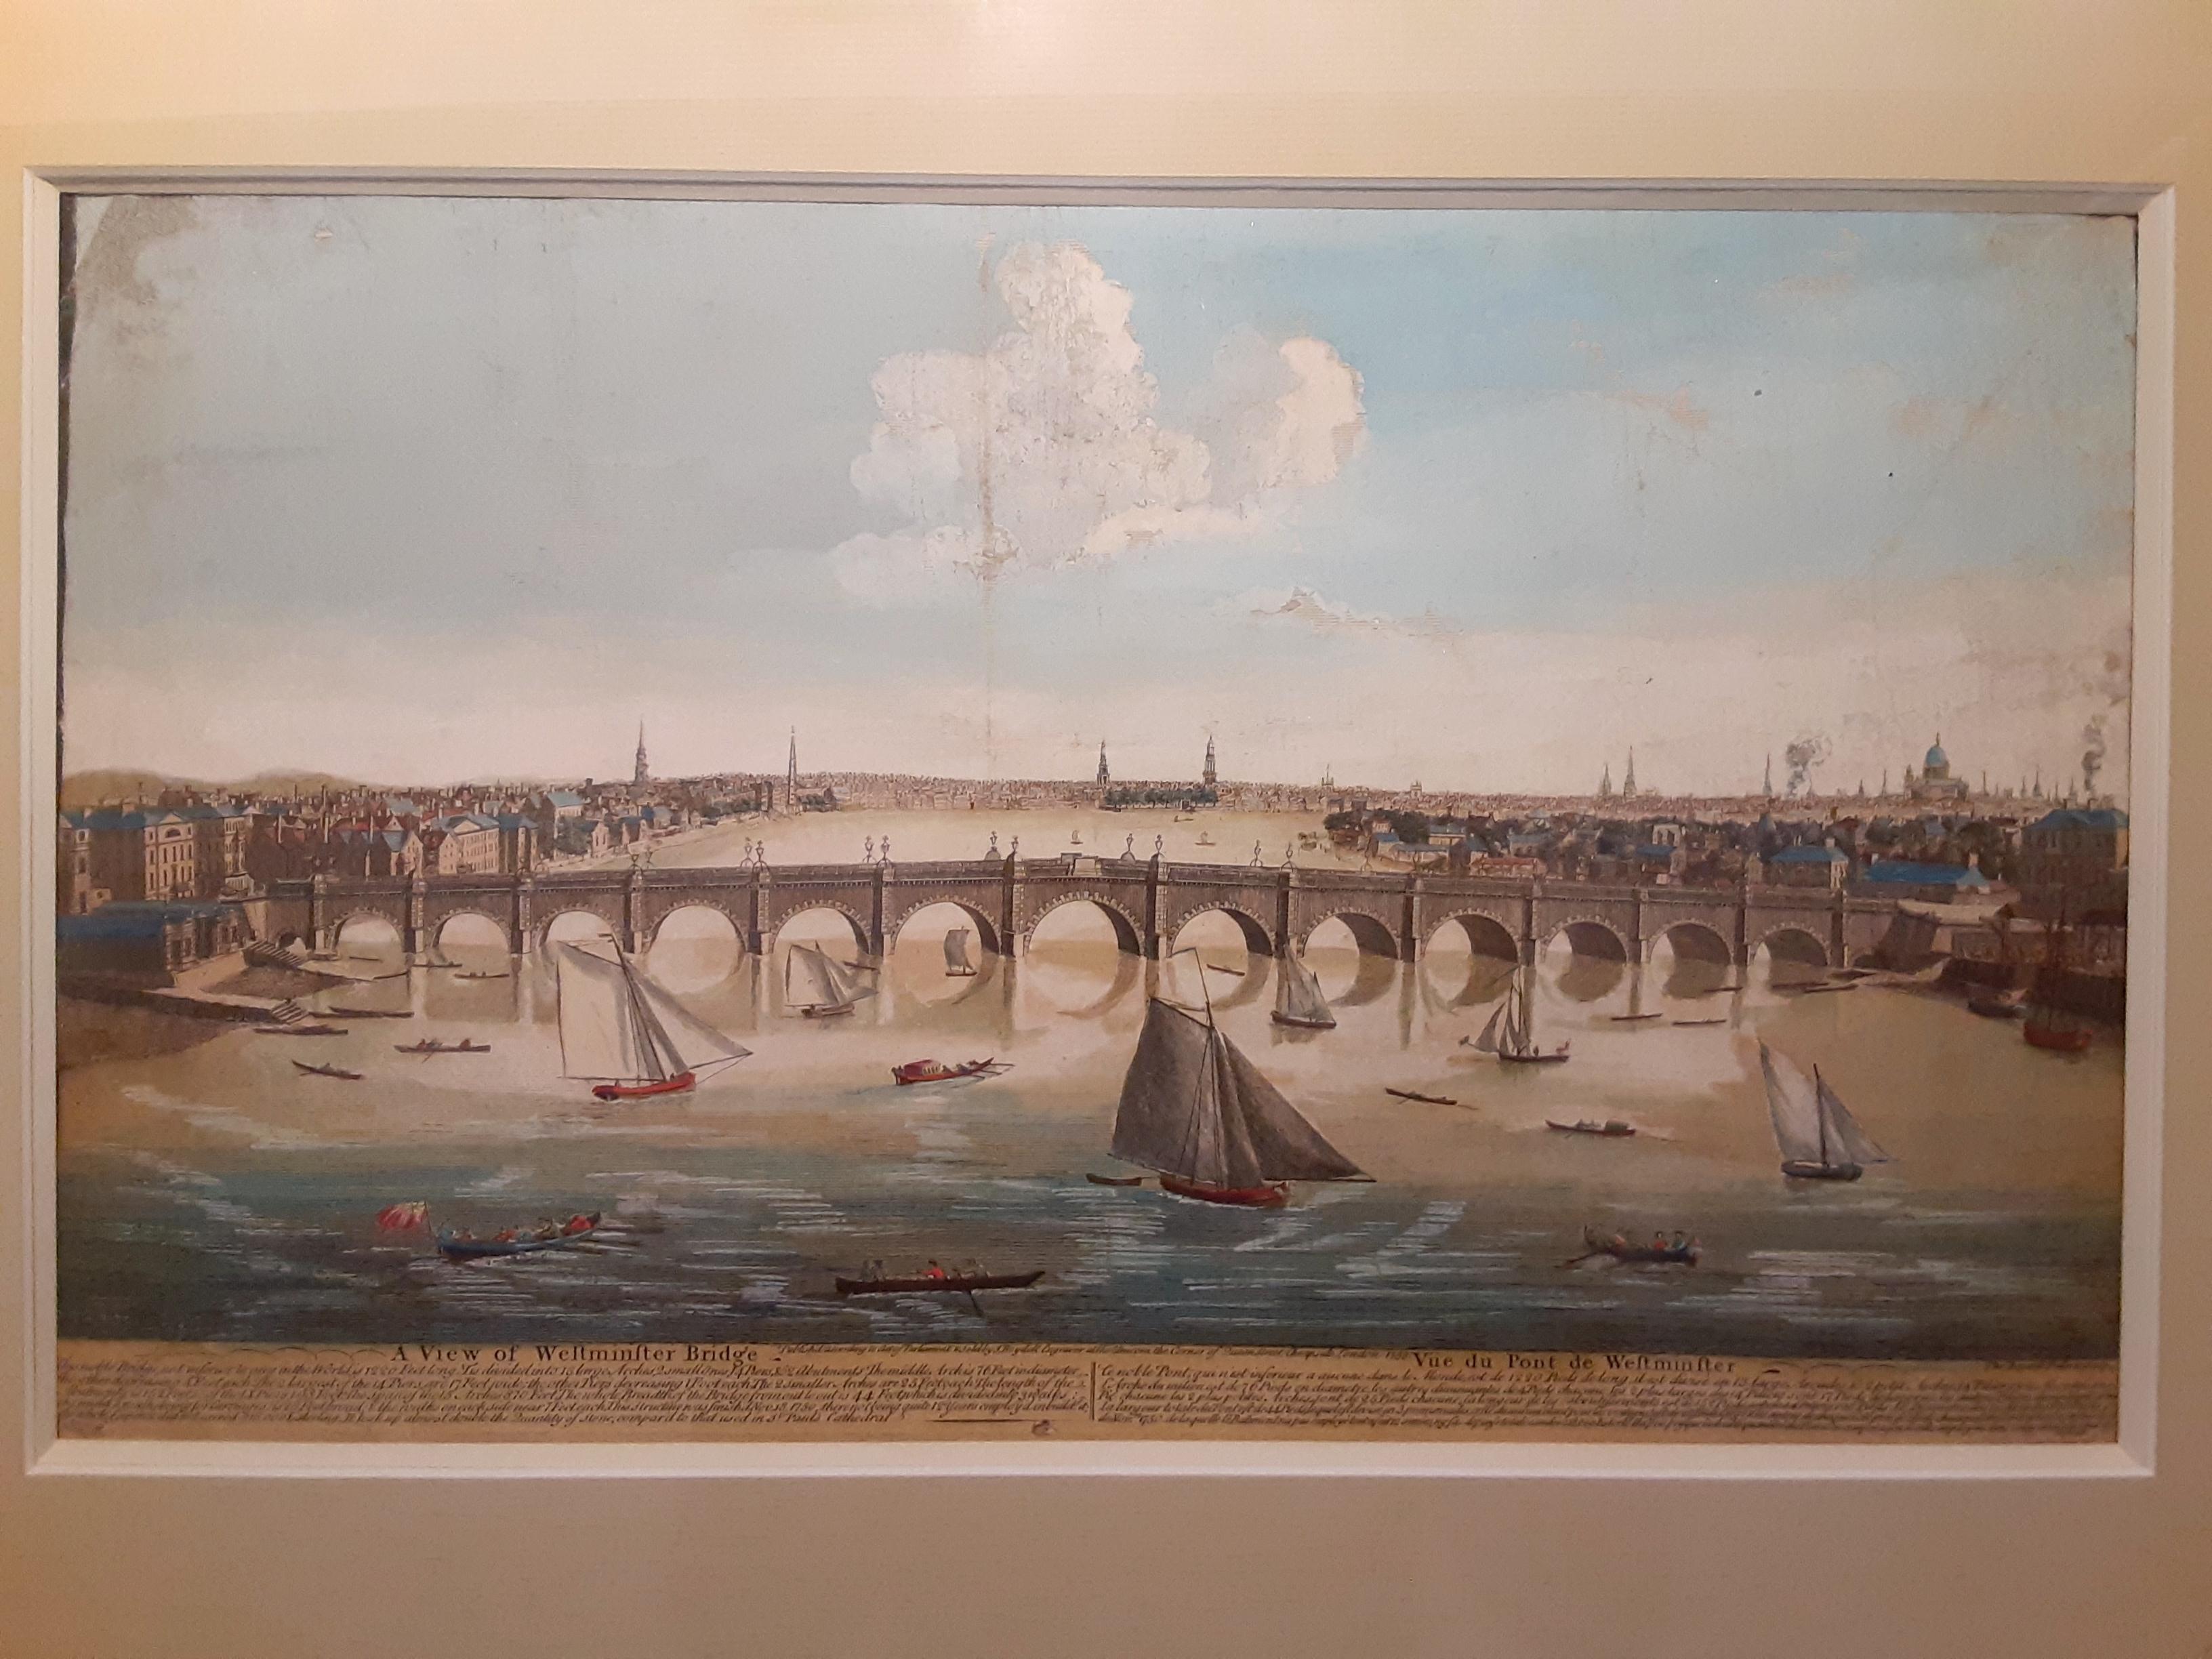 18th century etching of Westminster Bridge, London, giltwood frame, marked 1753, hand-colored.

Dimensions (framed): 24” W x 17.5” H x 0.5” D
Dimensions (etching): 16” W x 10” H.